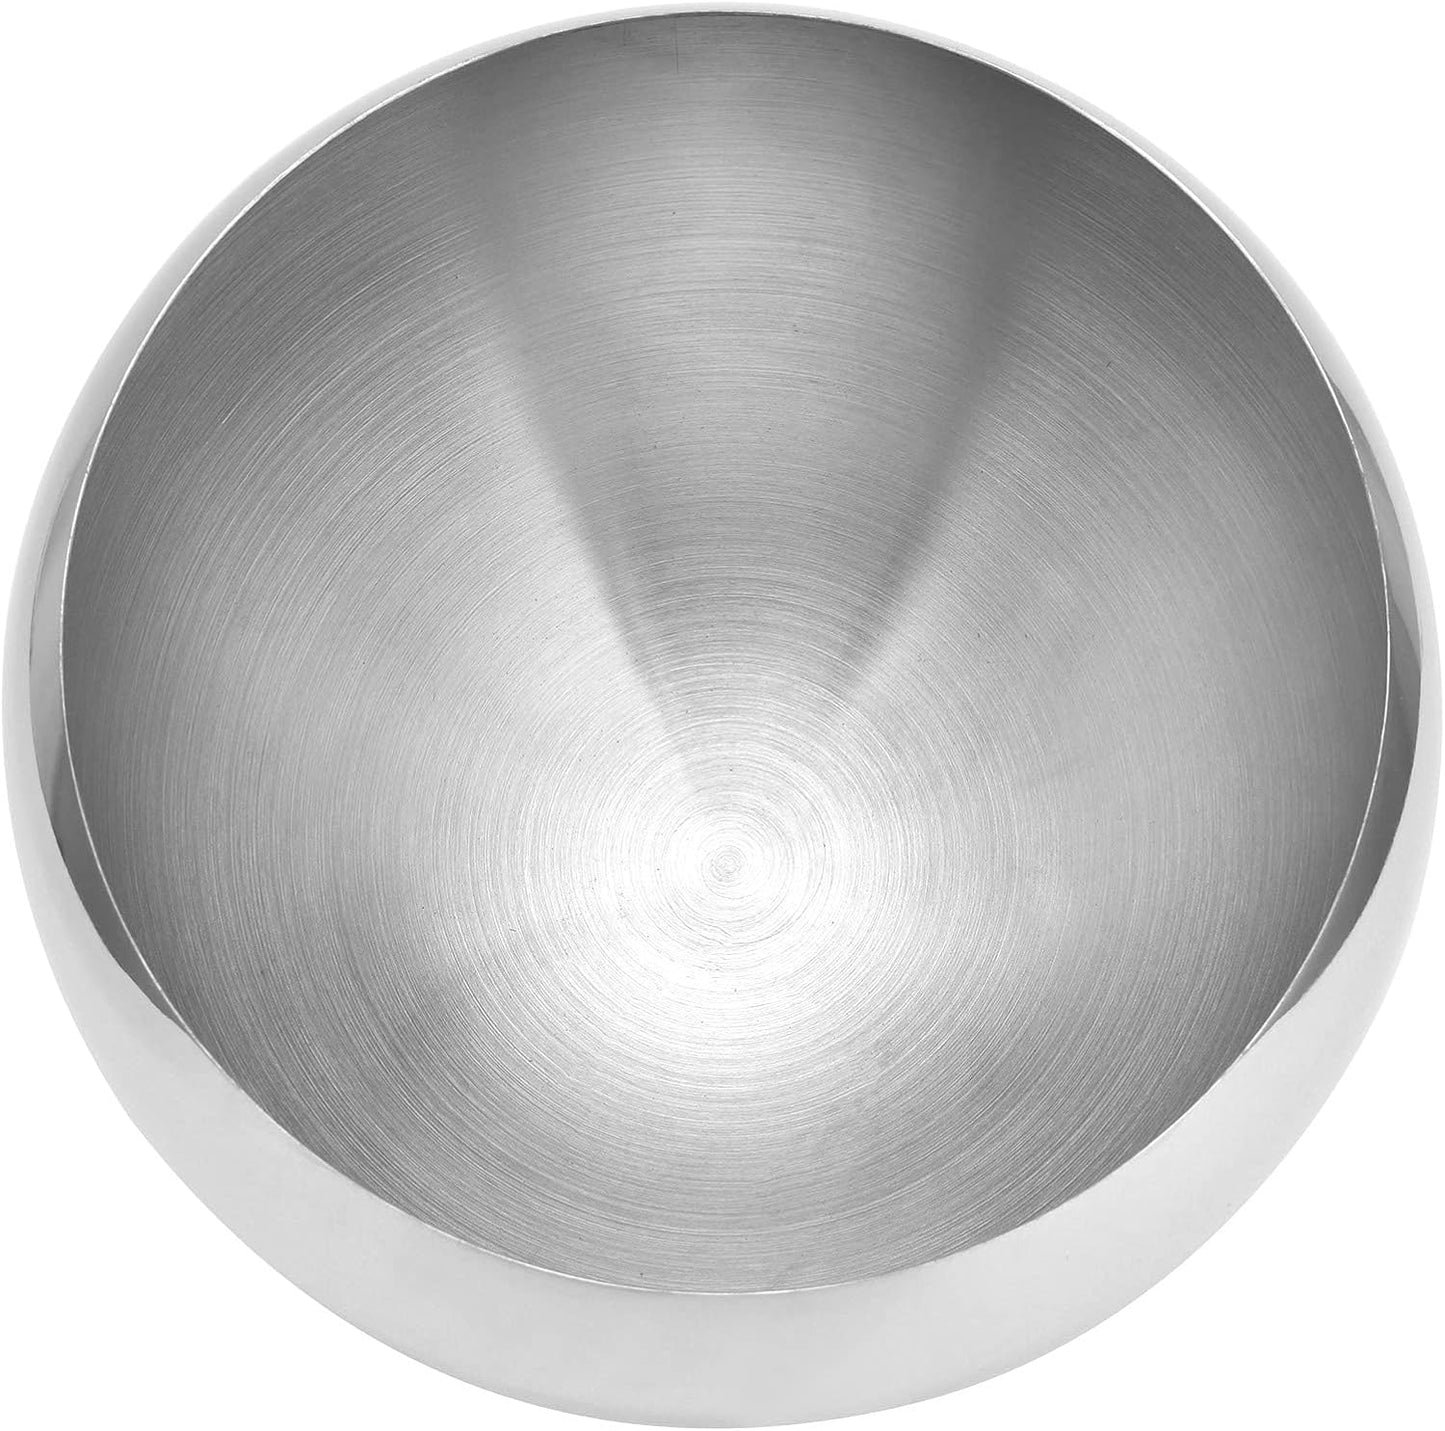 22cm Silver Saucer Bowl For Sauce, Snack, Appetizers